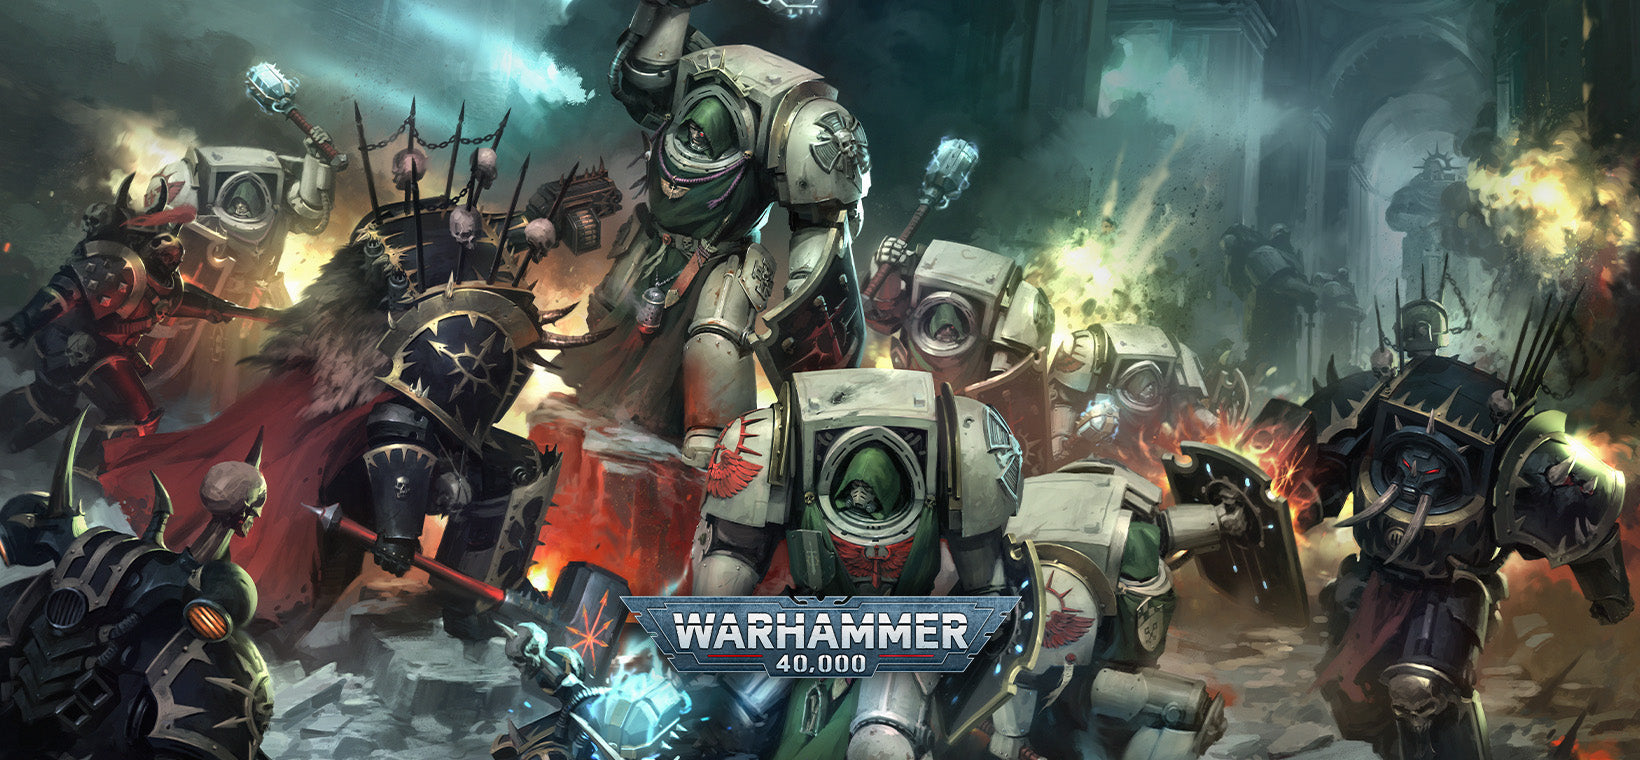 Warhammer 40,000 - Fight For the Future of Humanity Across a Vicious, War-Torn Galaxy